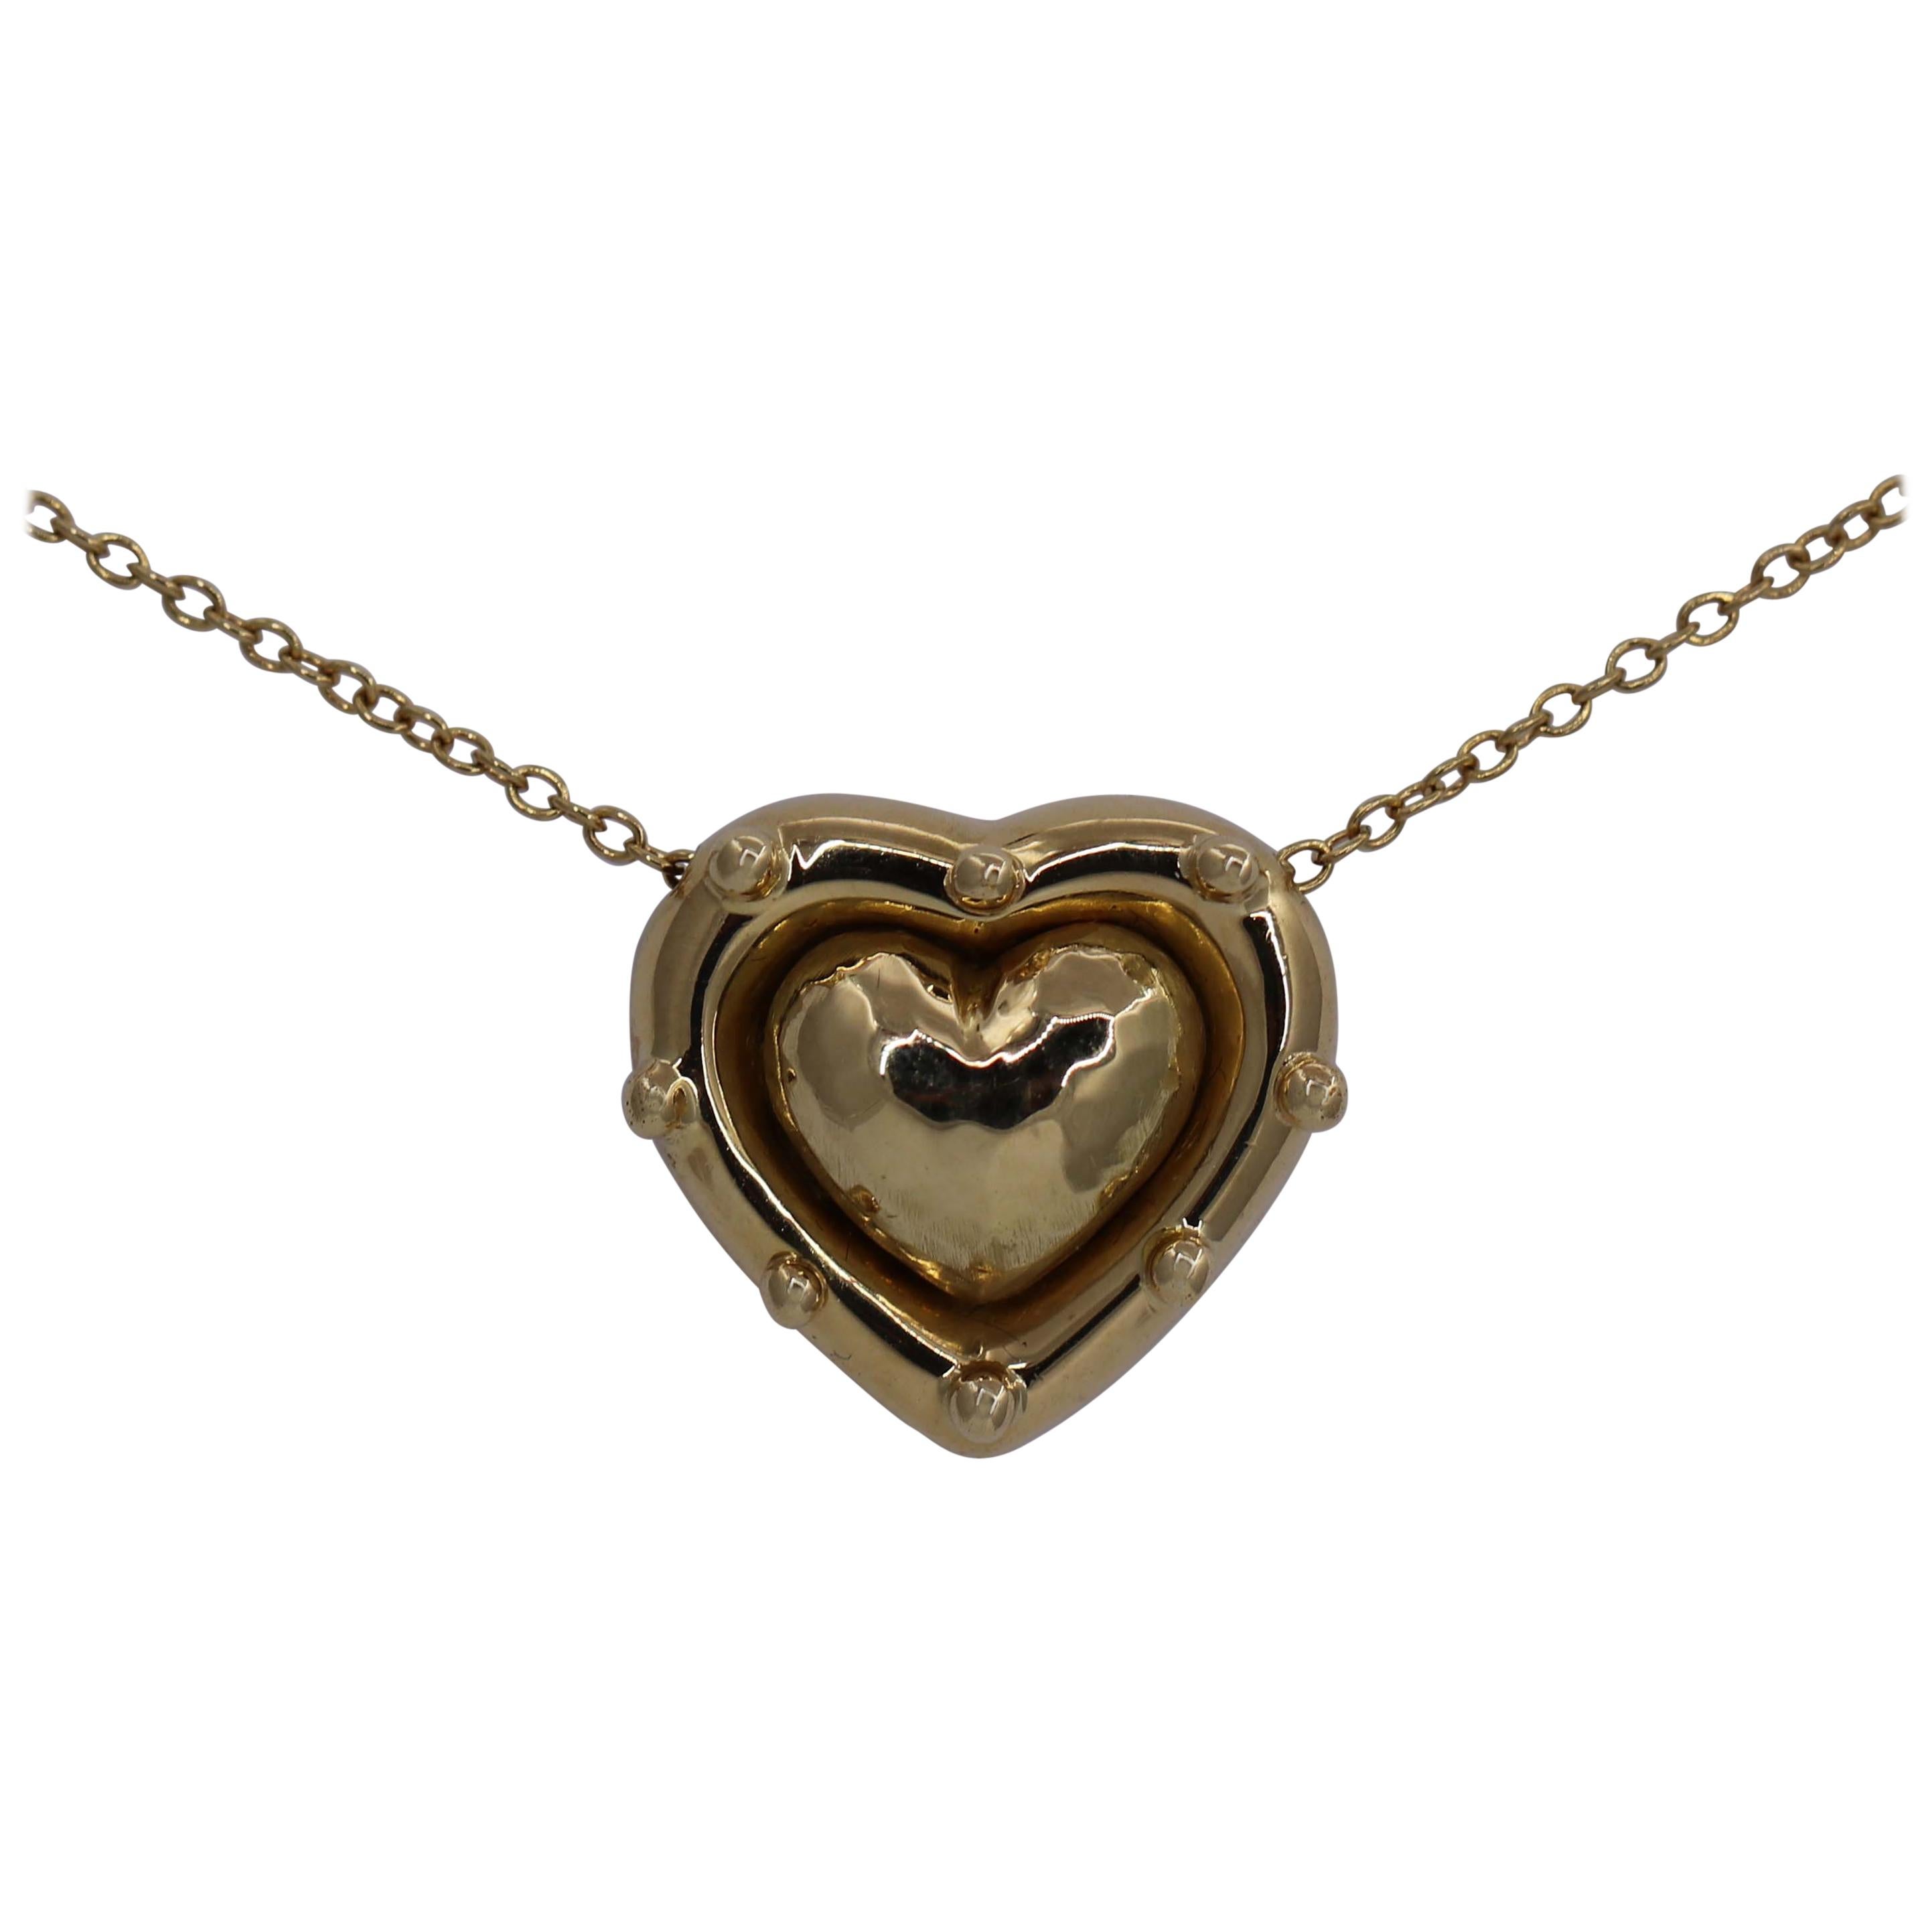 Tiffany & Co. Puffed Heart Pendant on Gold Chain